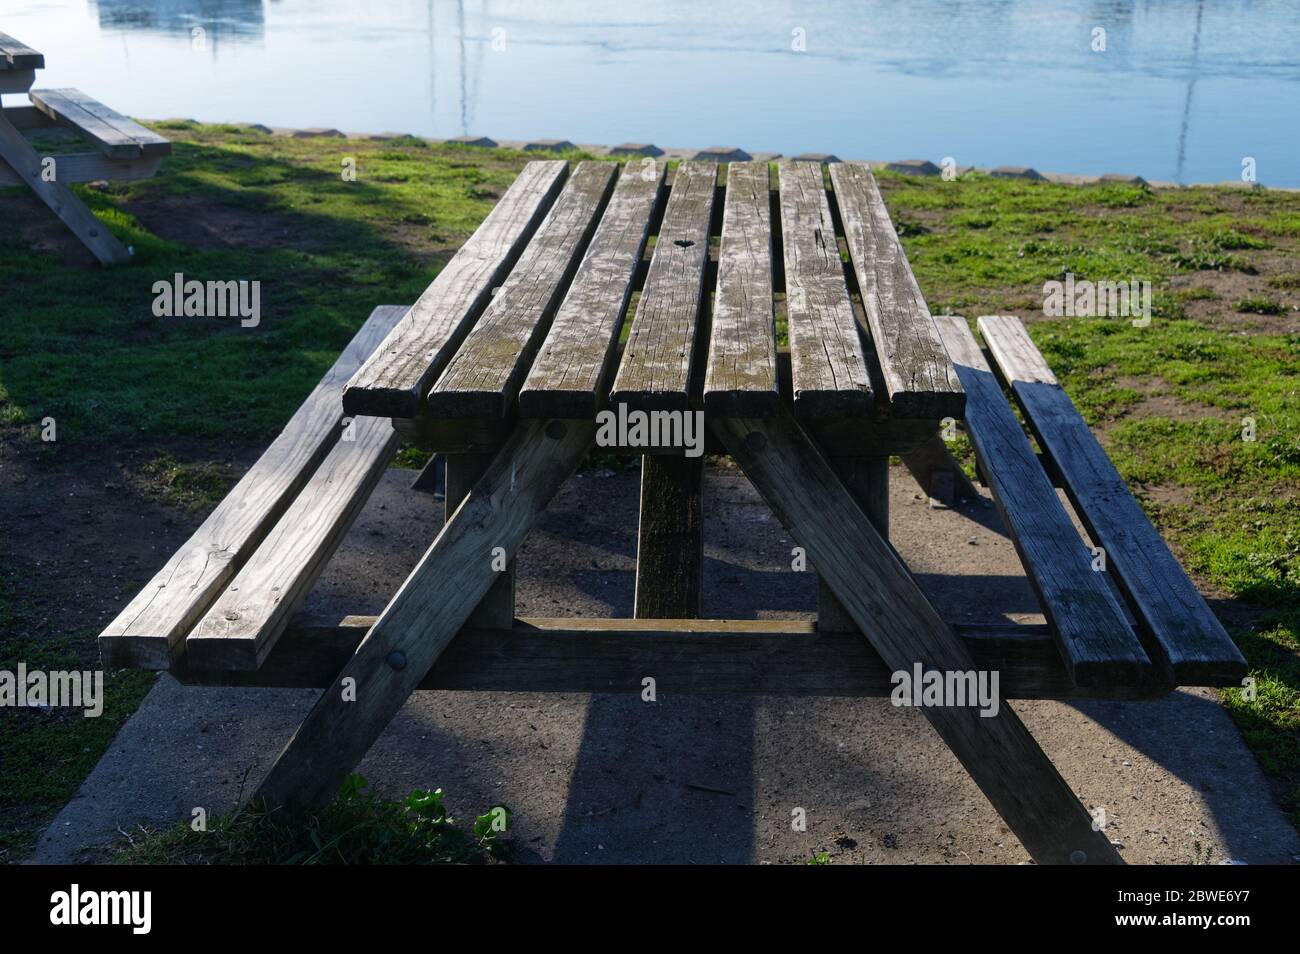 A great place for a picnic, a wooden table with bench seats sits in front of the sea Stock Photo